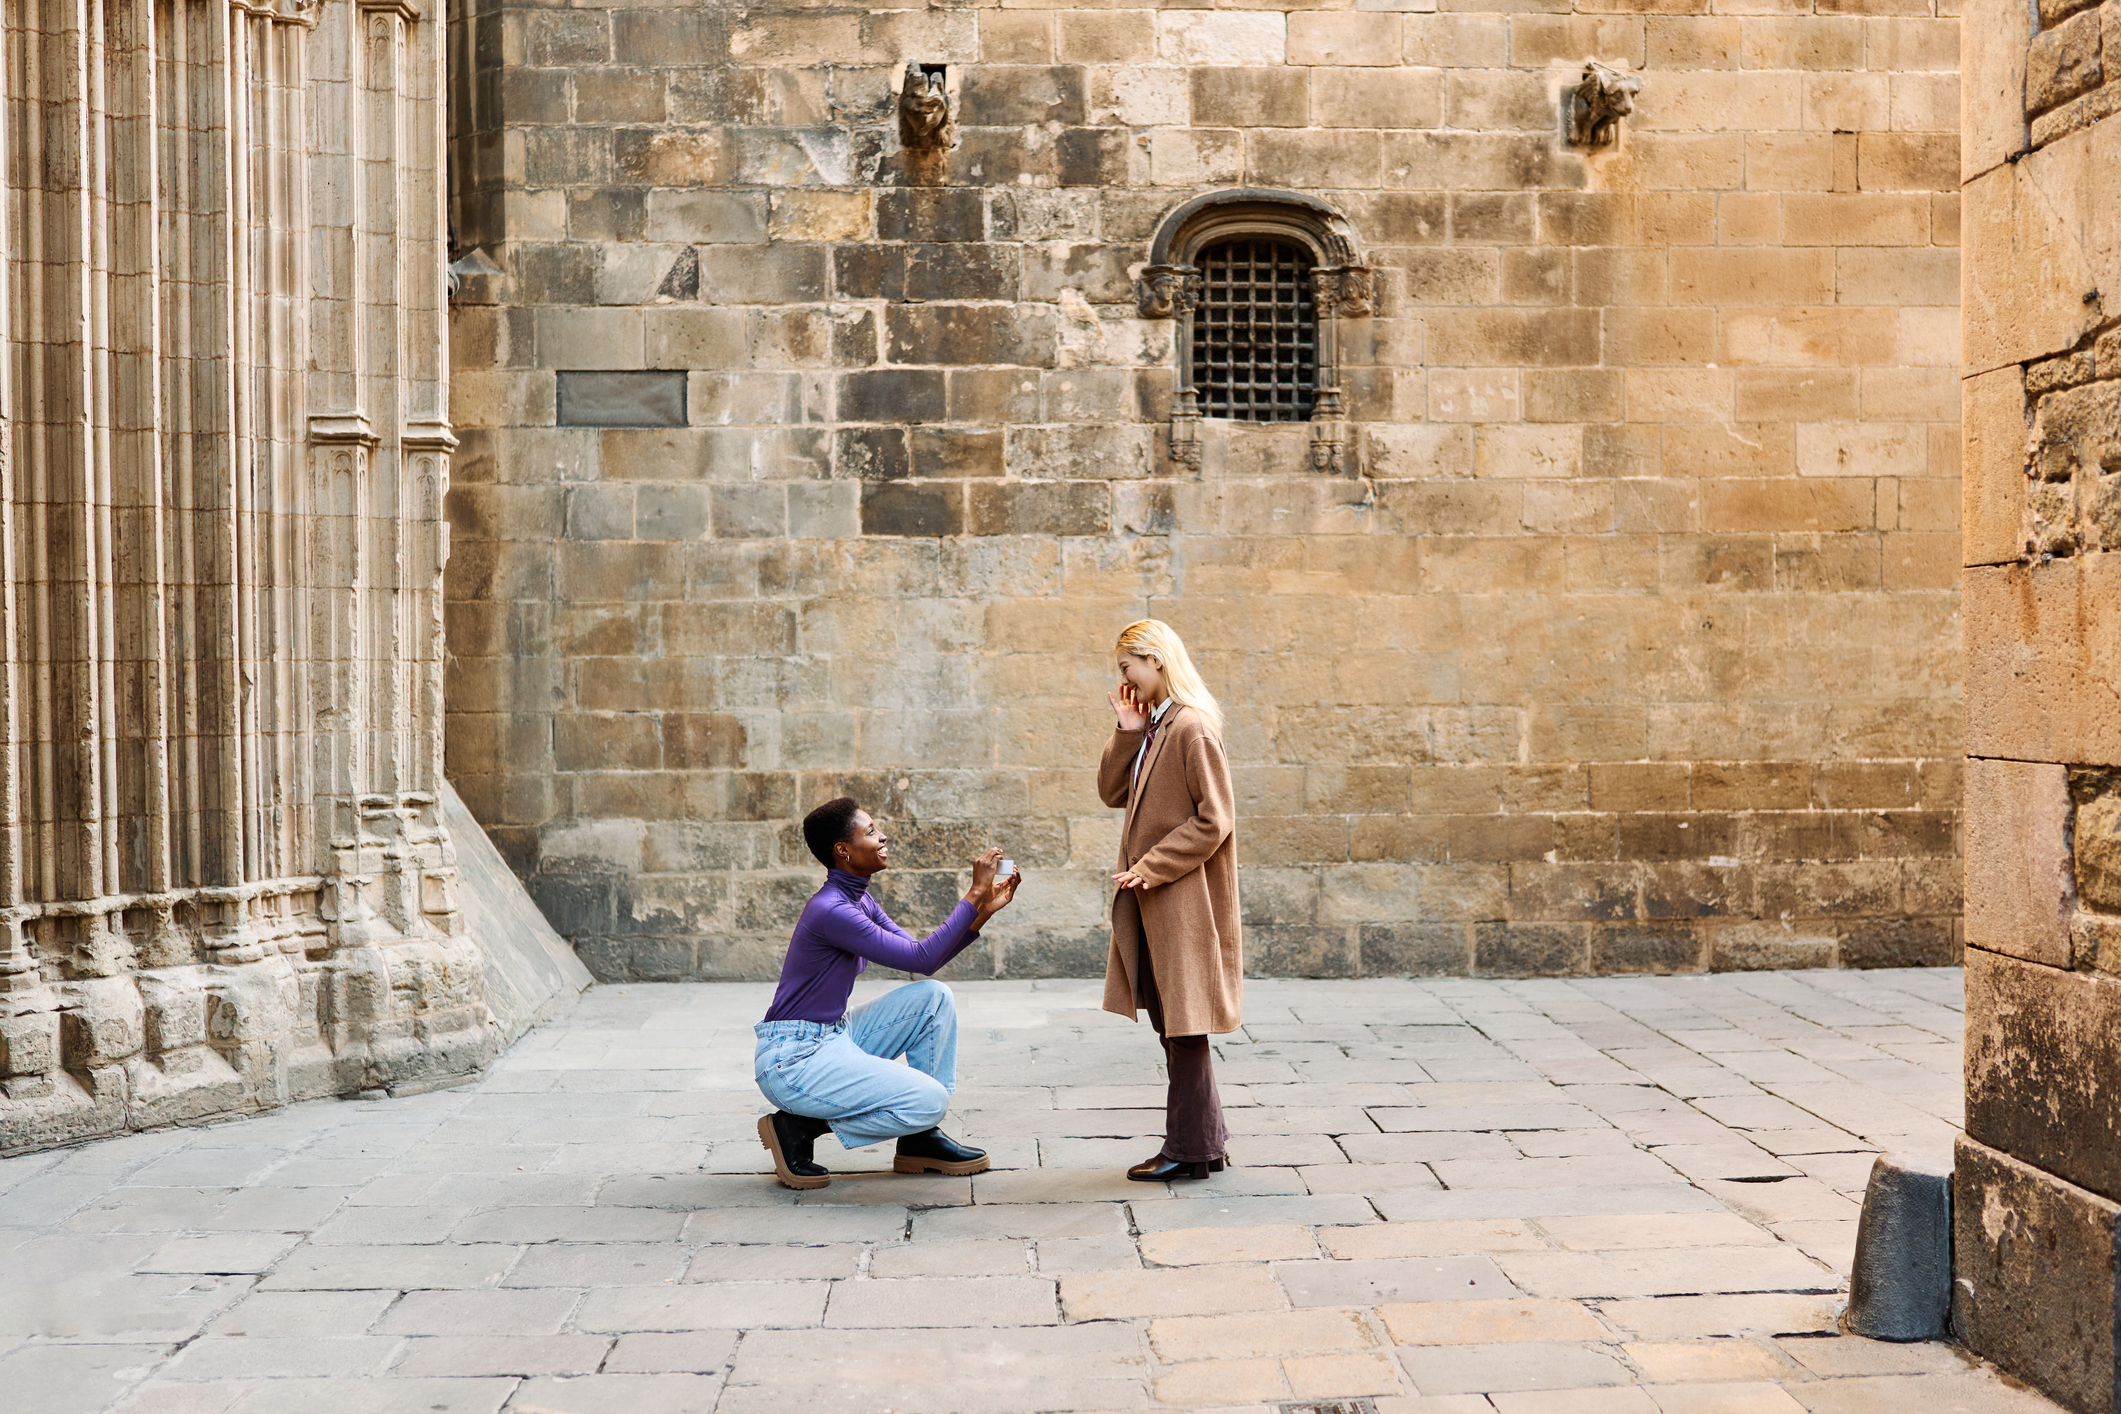 Man on one knee proposing to a woman in a public square. Both are smiling